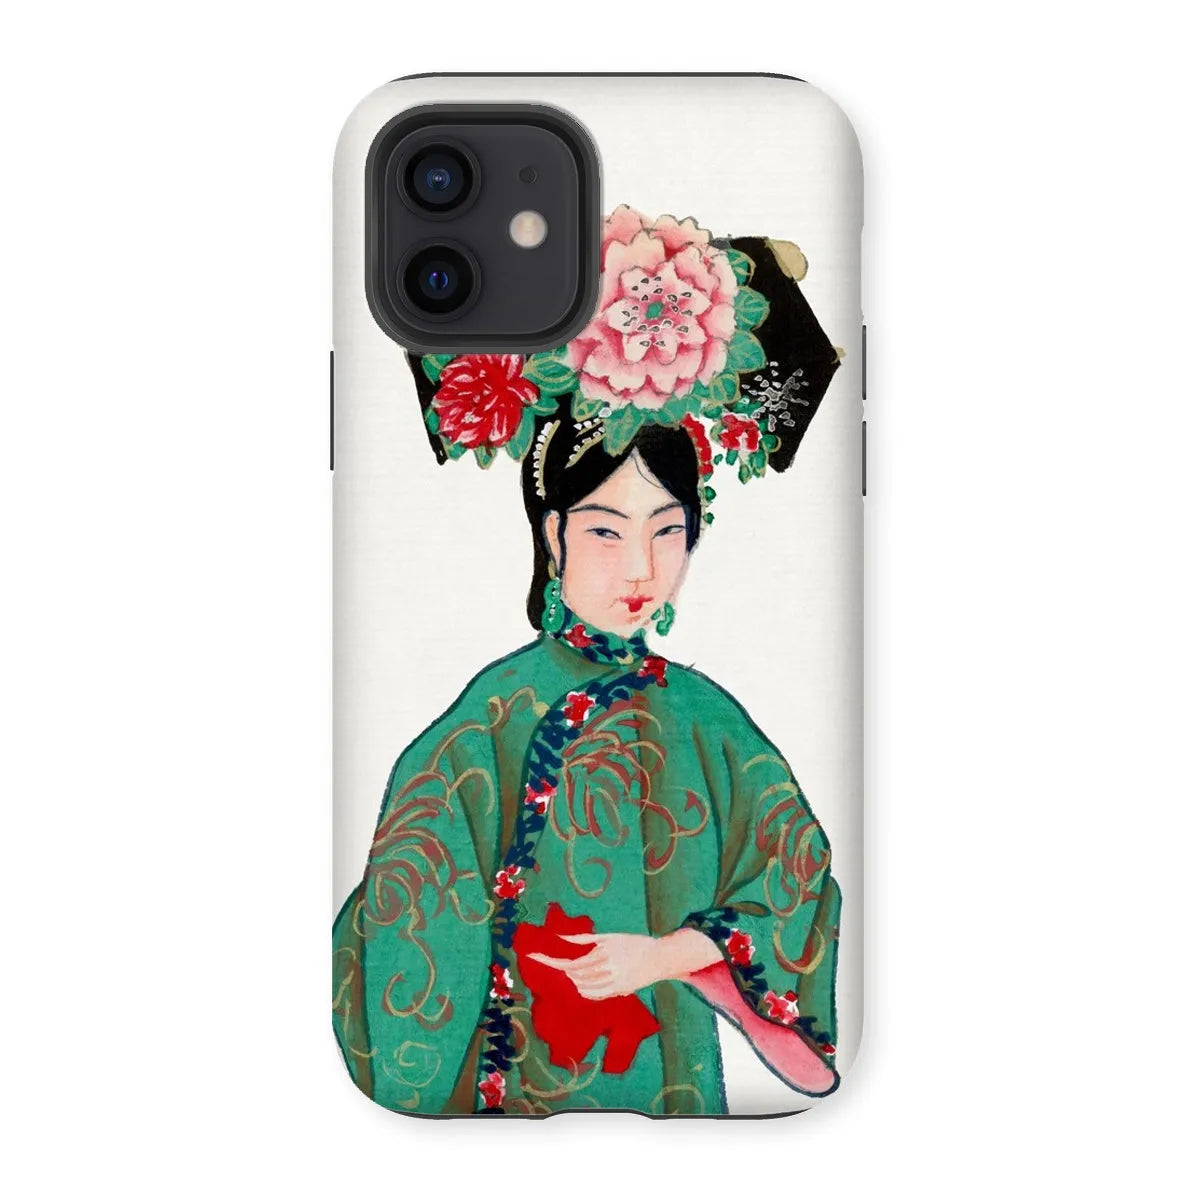 Chinese Noblewoman In Manchu Couture Art Phone Case - Iphone 12 / Matte - Mobile Phone Cases - Aesthetic Art